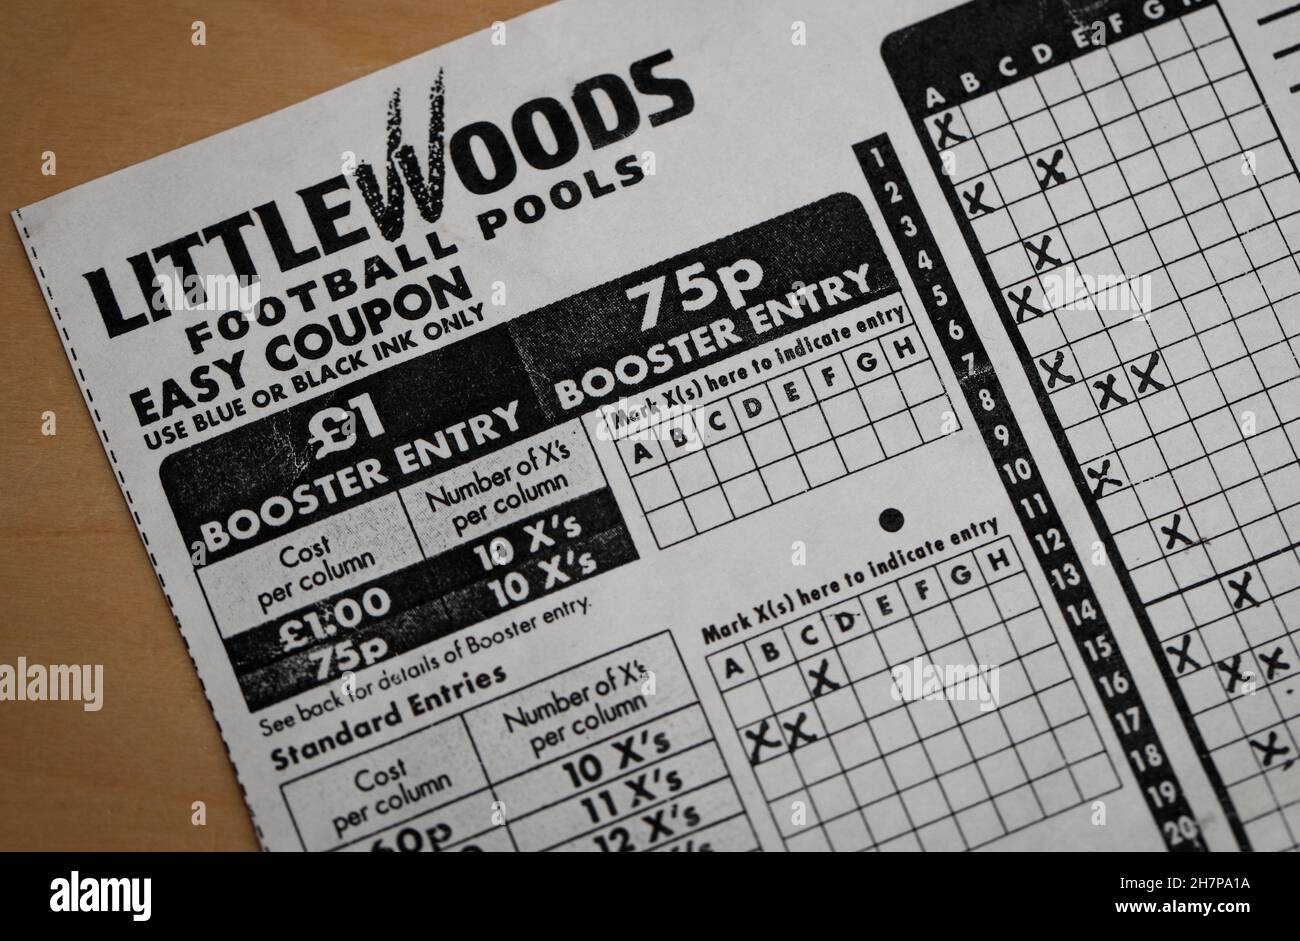 Littlewoods Football pools Coupon Stock Photo